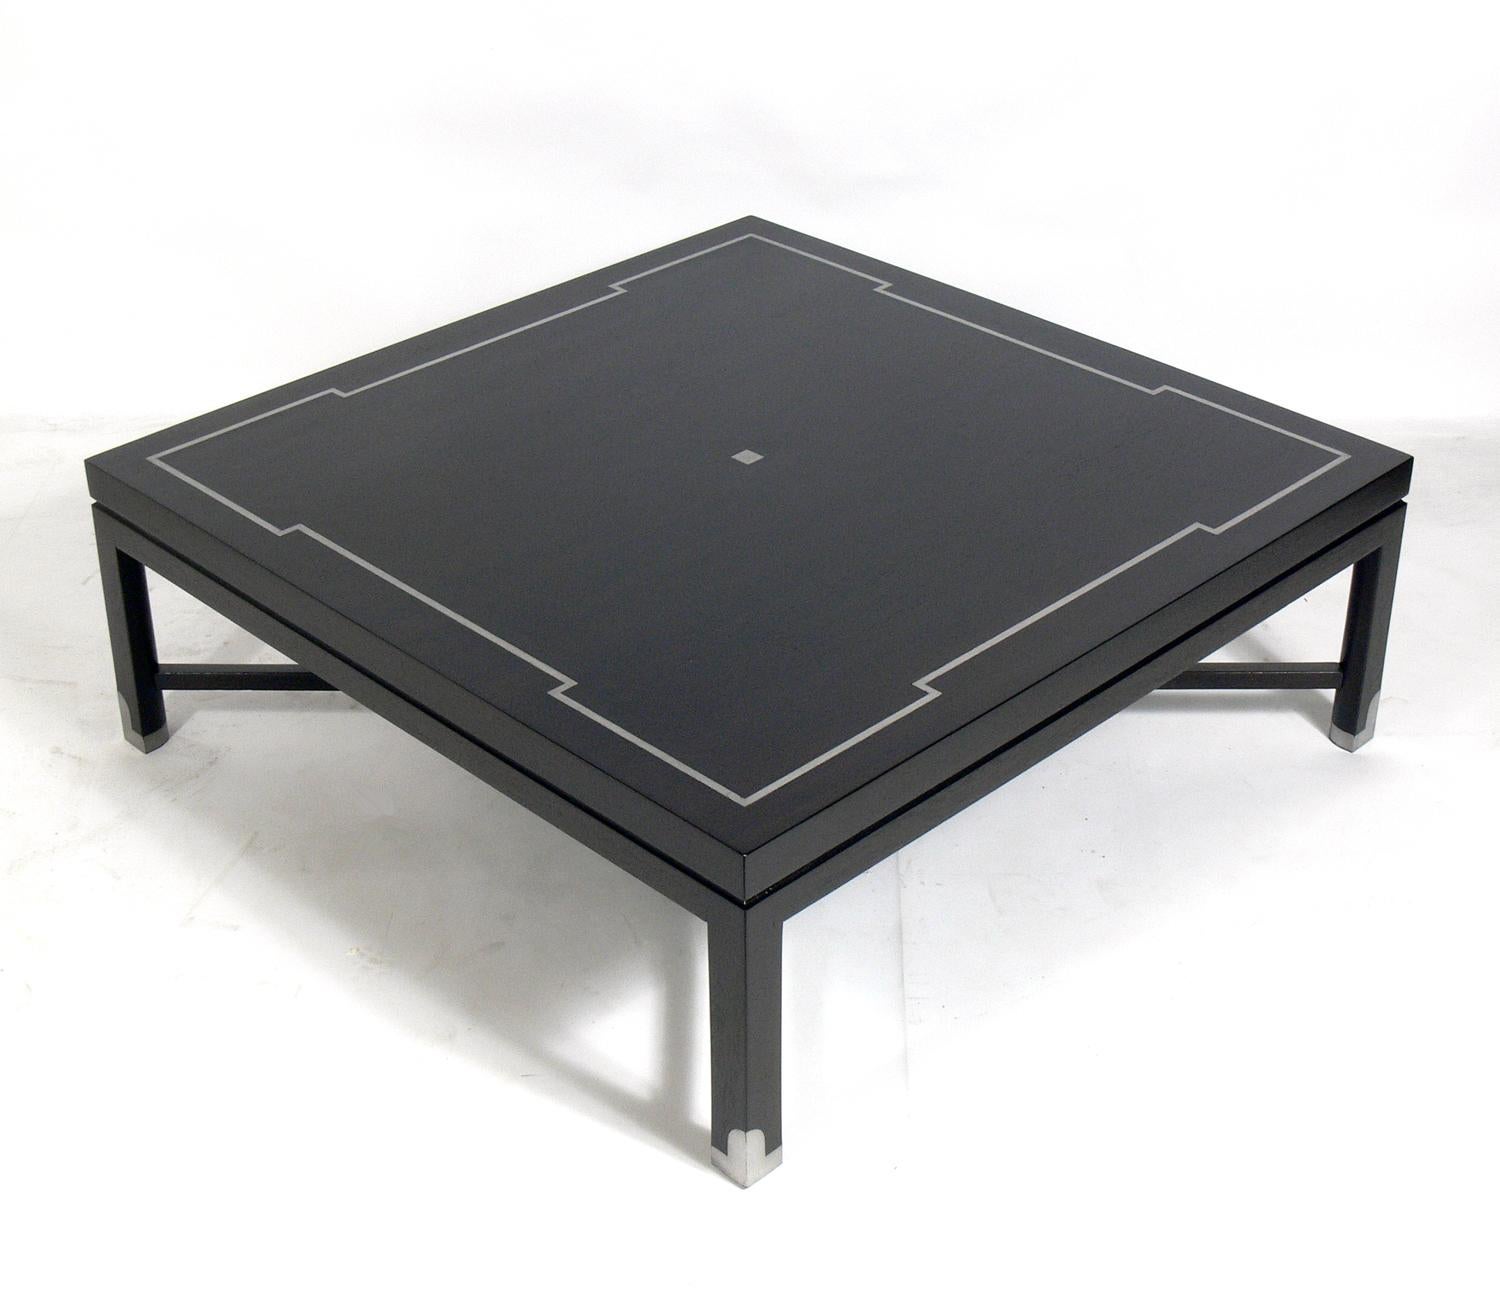 Elegant coffee table, custom made by Tommi Parzinger Originals, American, circa 1960s. It has been refinished in an ultra-deep brown and is inlaid with pewter on the tabletop and the sabots. This large-scale table measures an impressive 42